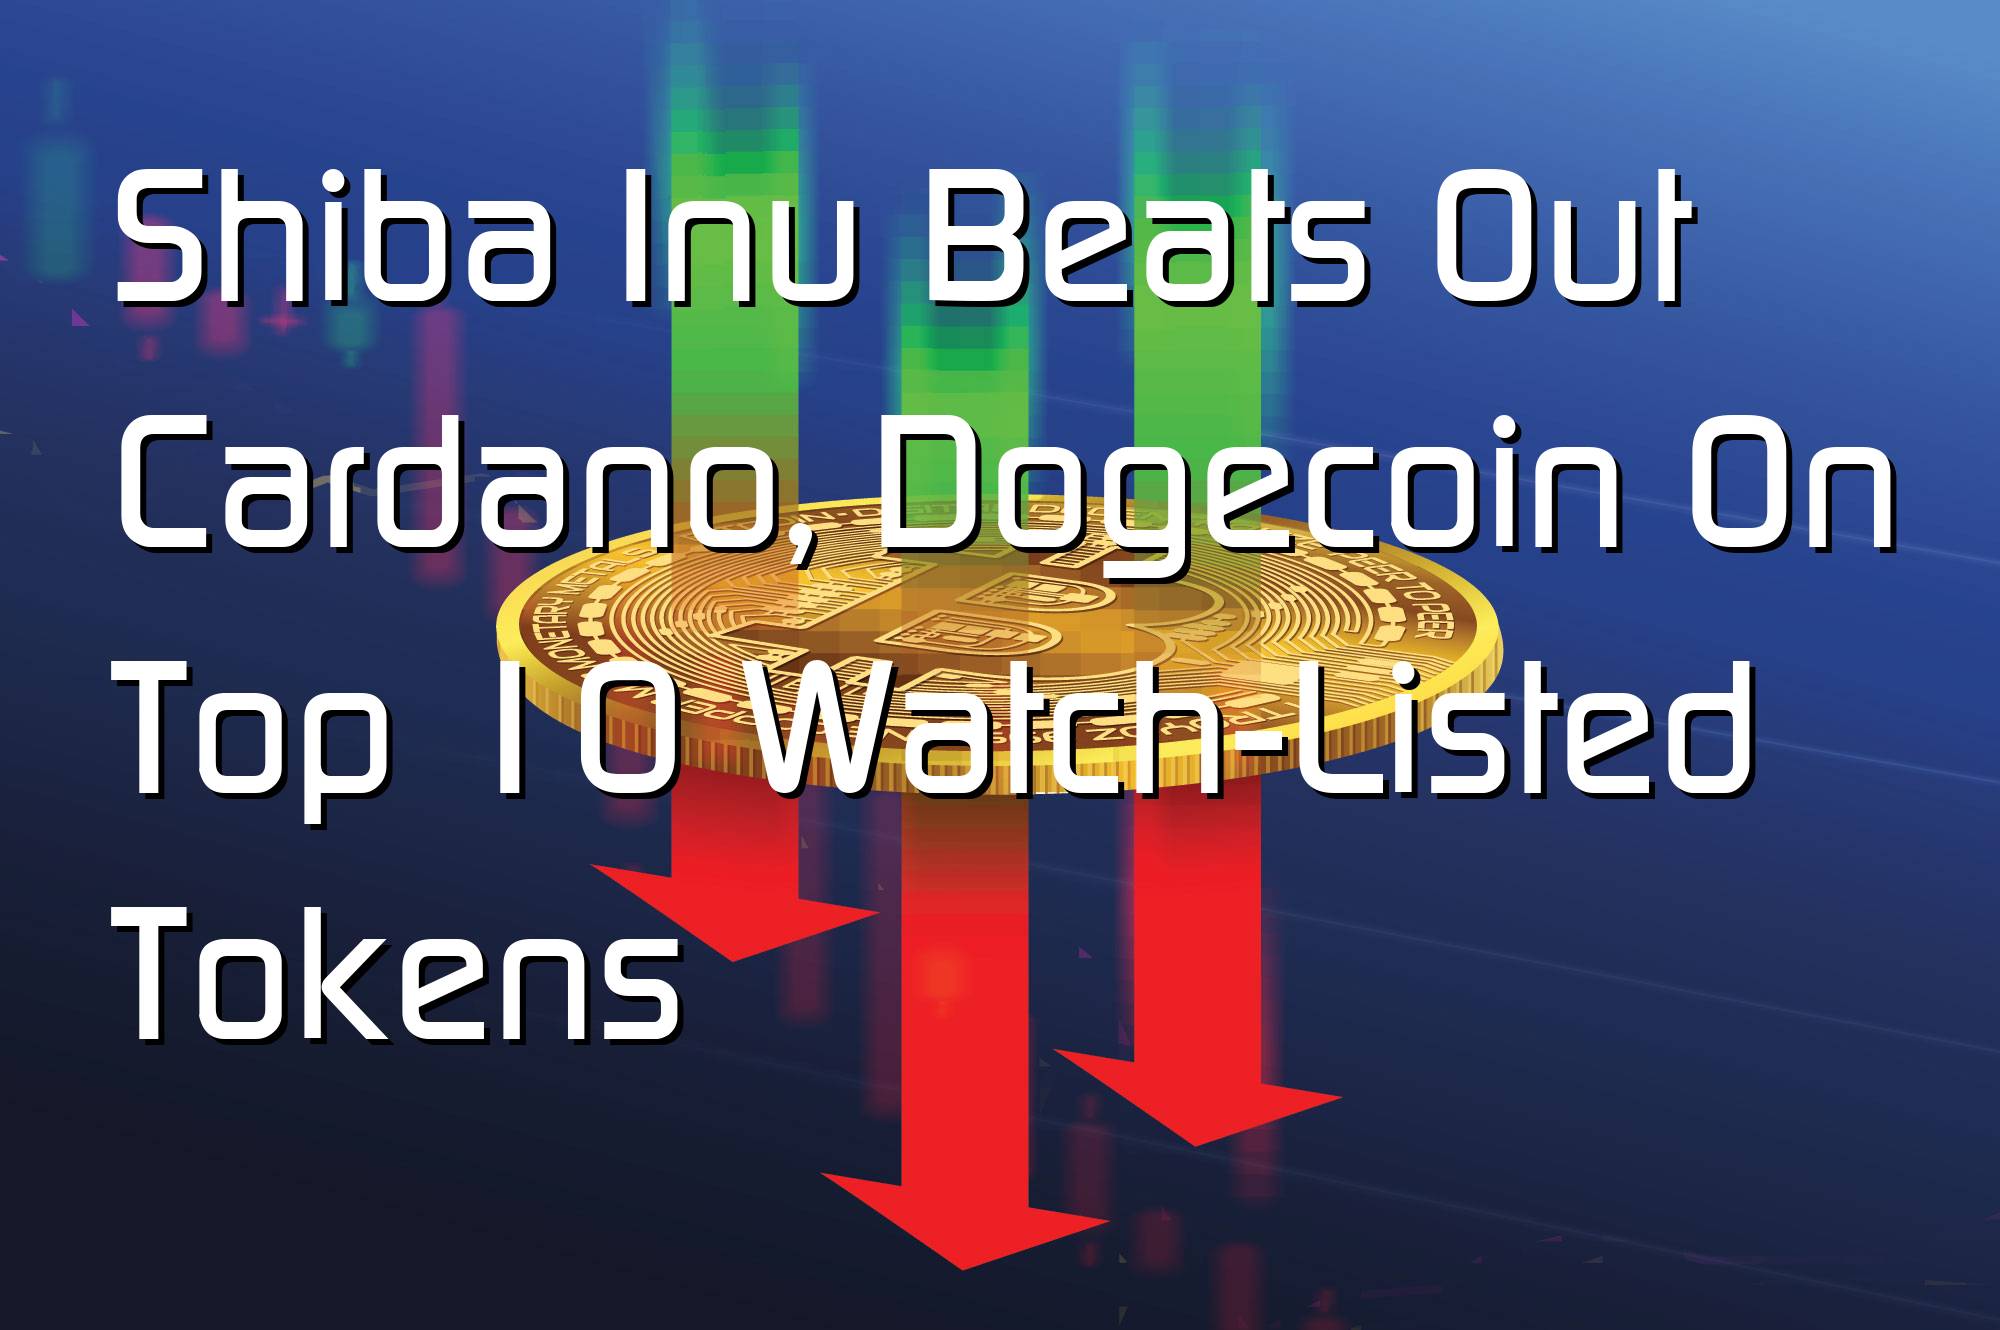 @$66333: Shiba Inu Beats Out Cardano, Dogecoin On Top 10 Watch-Listed Tokens